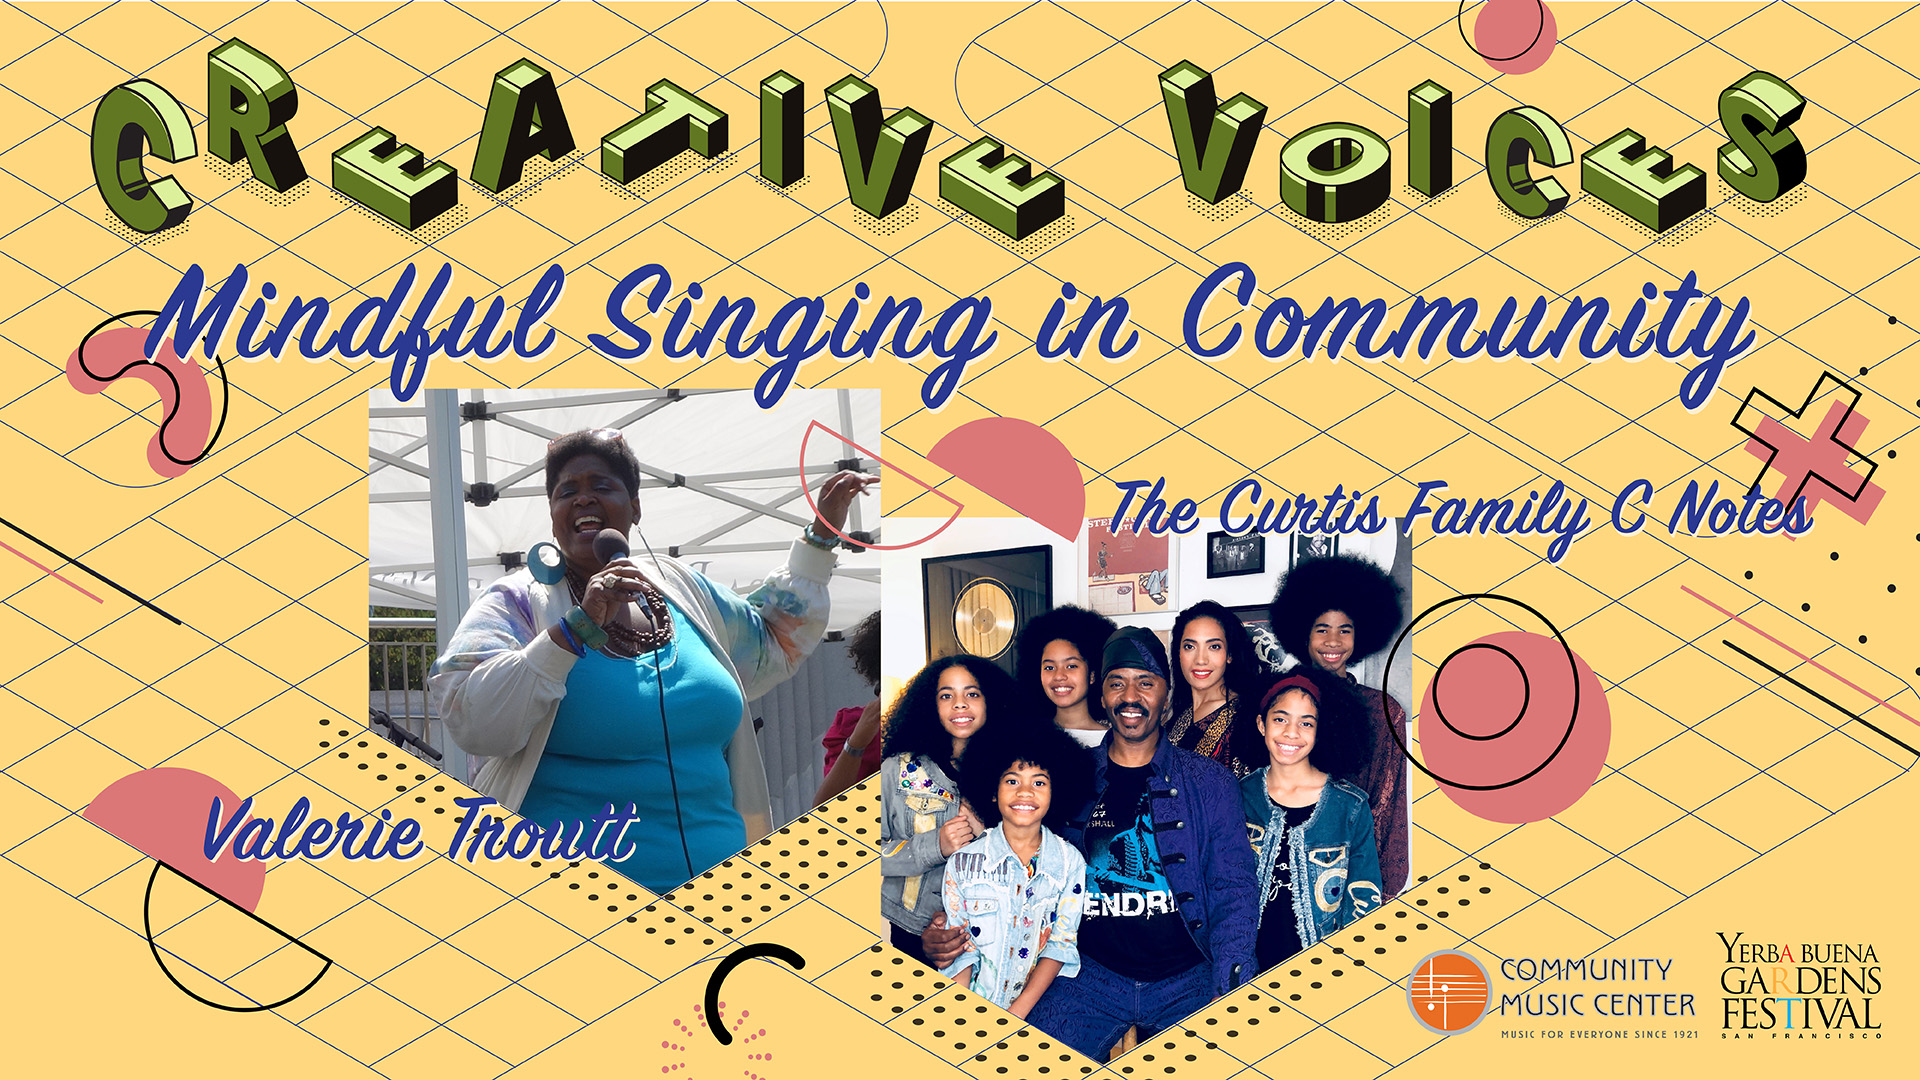 Creative Voices graphic featureing two photos. One photos with Valerie Troutt, singing into a microphone outdoors. The other photo shows seven members of the Curtis Family C Notes smiling.